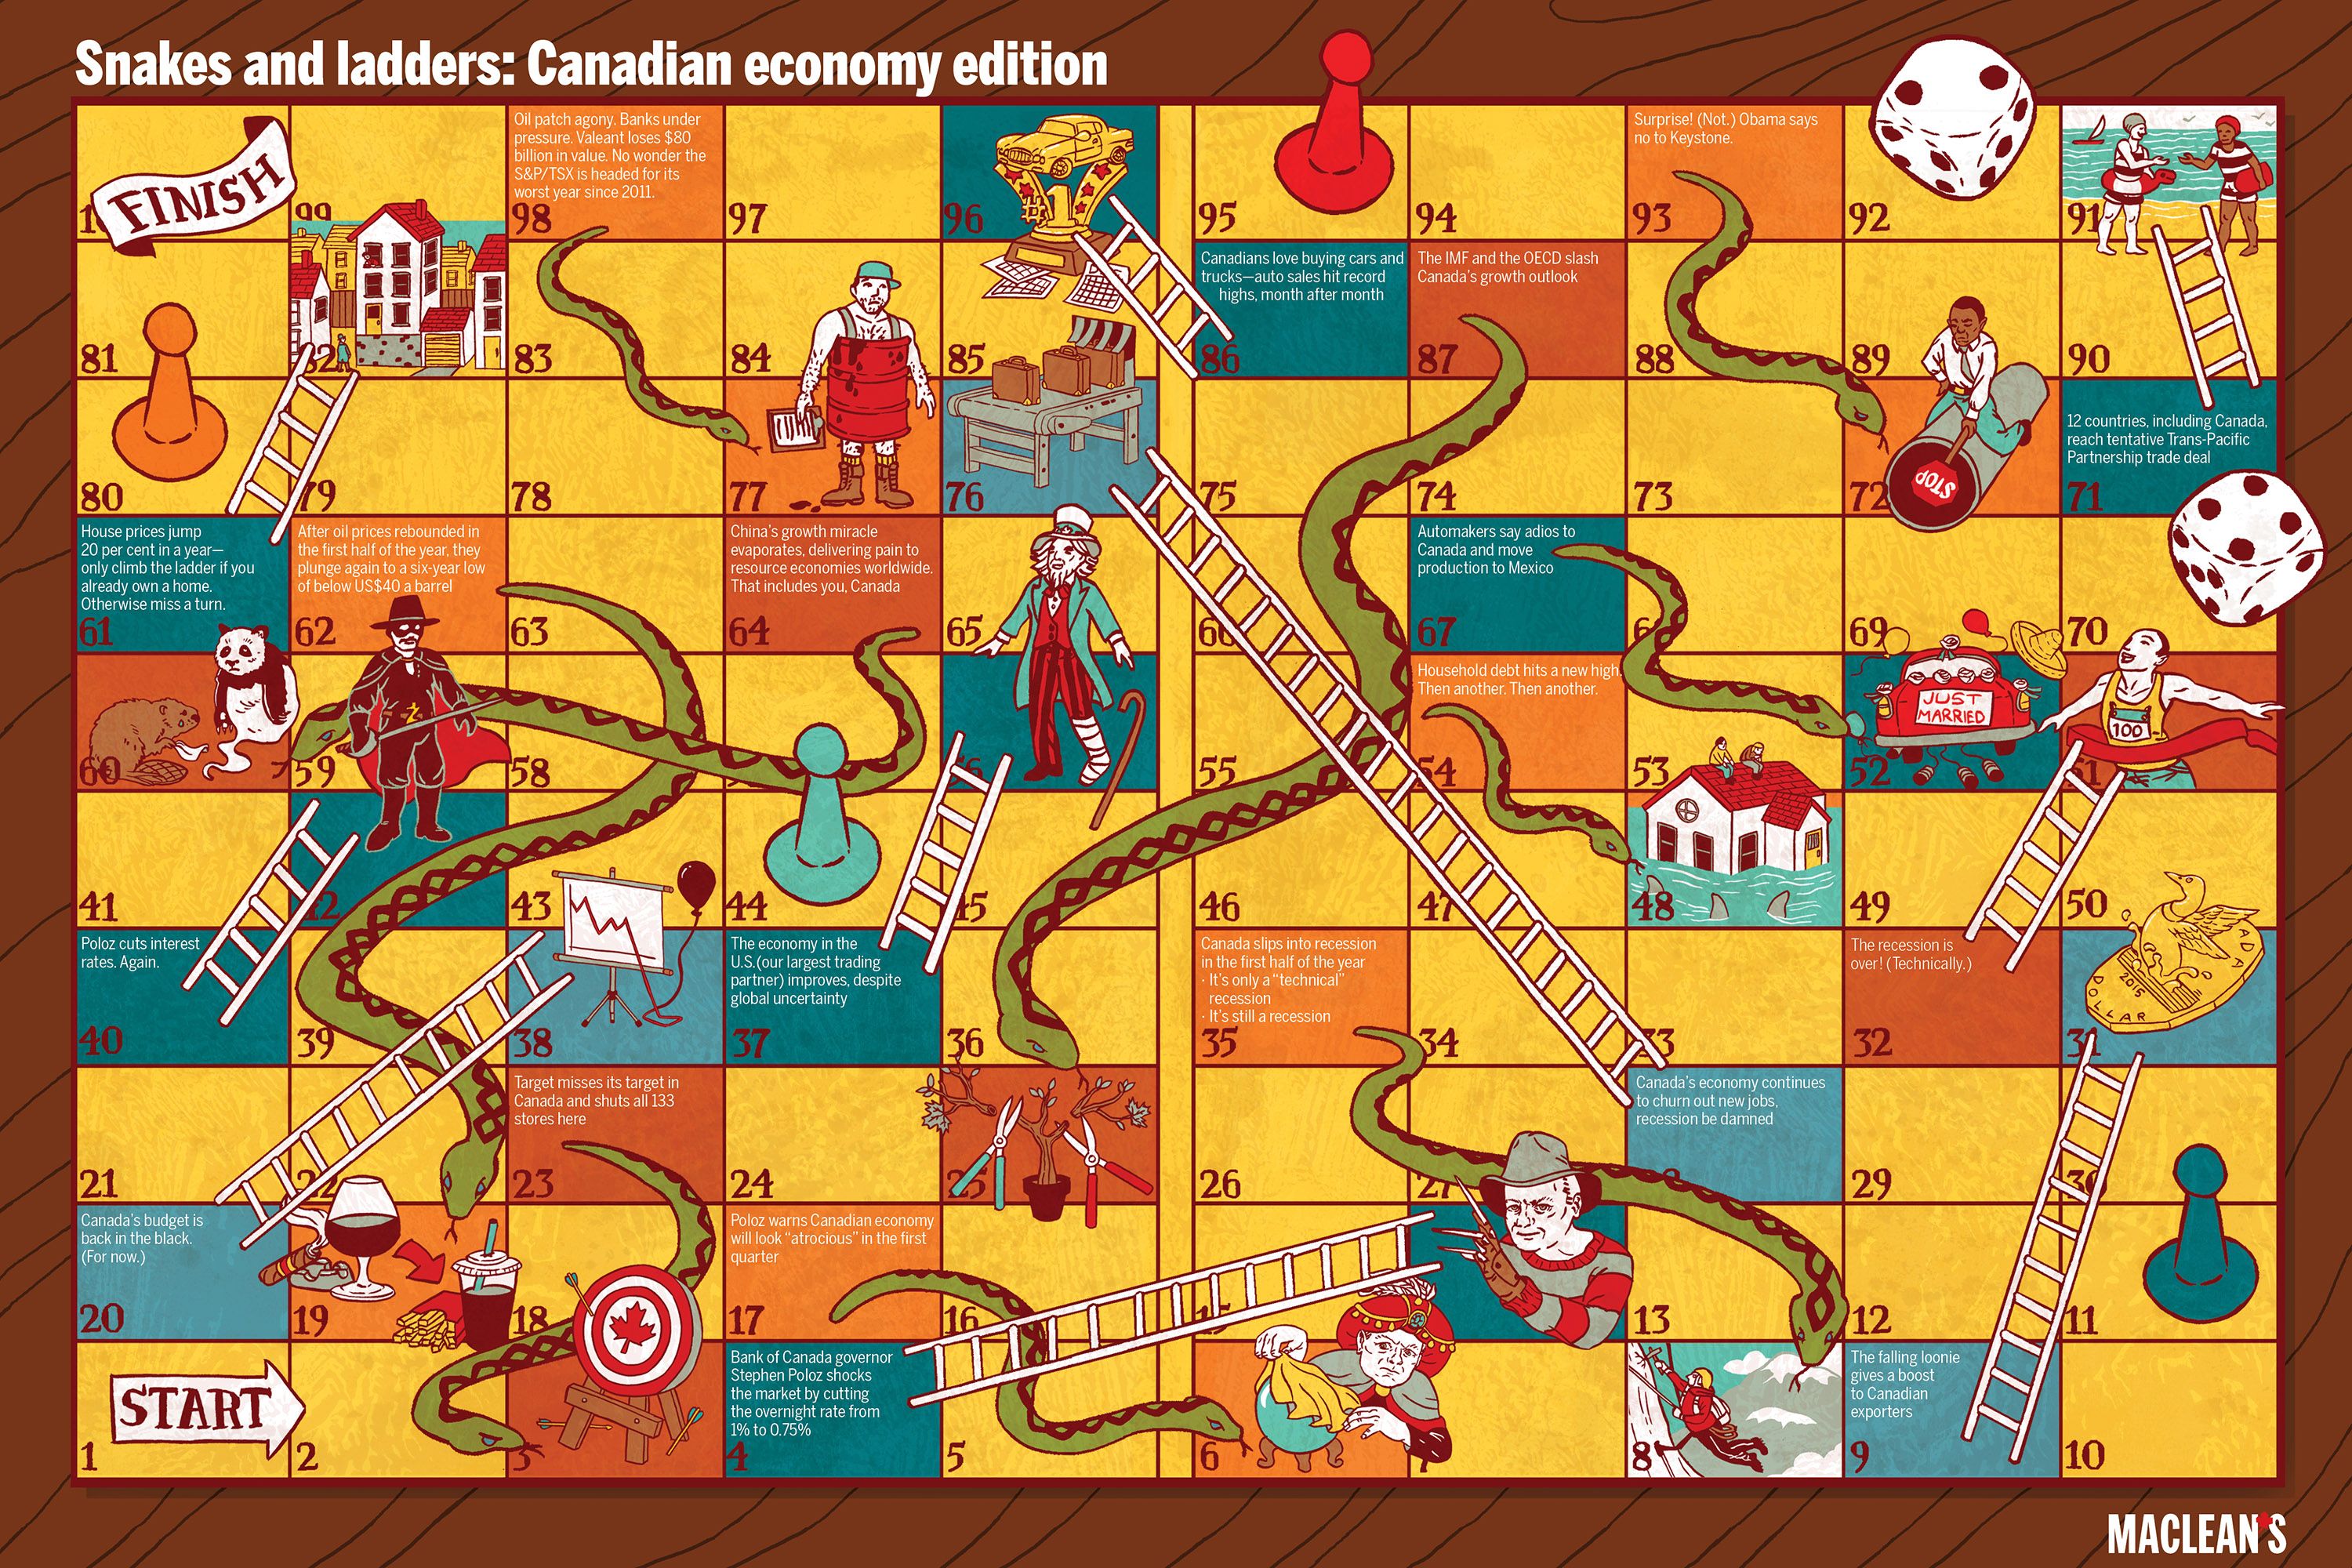 Snakes and Ladders: Canadian economy edition